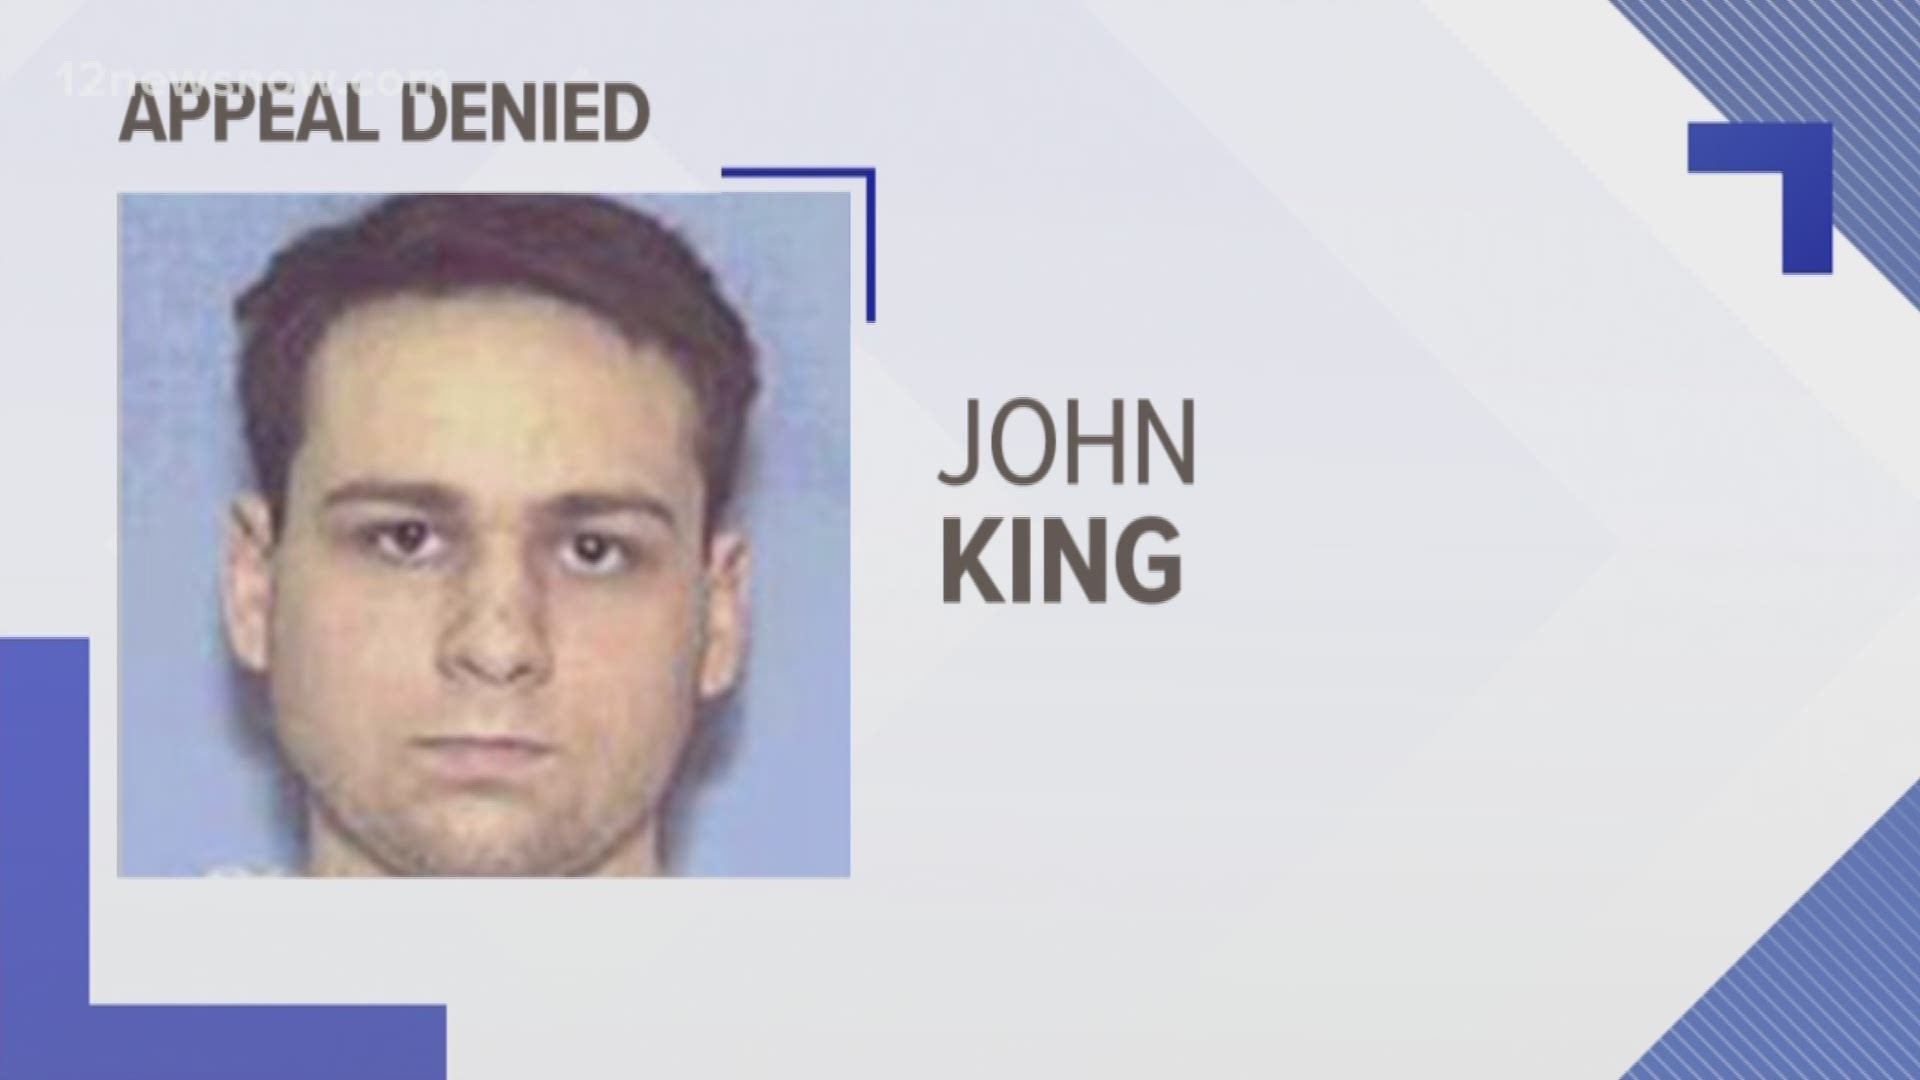 Supreme Court rejects appeal of Byrd killer on death row